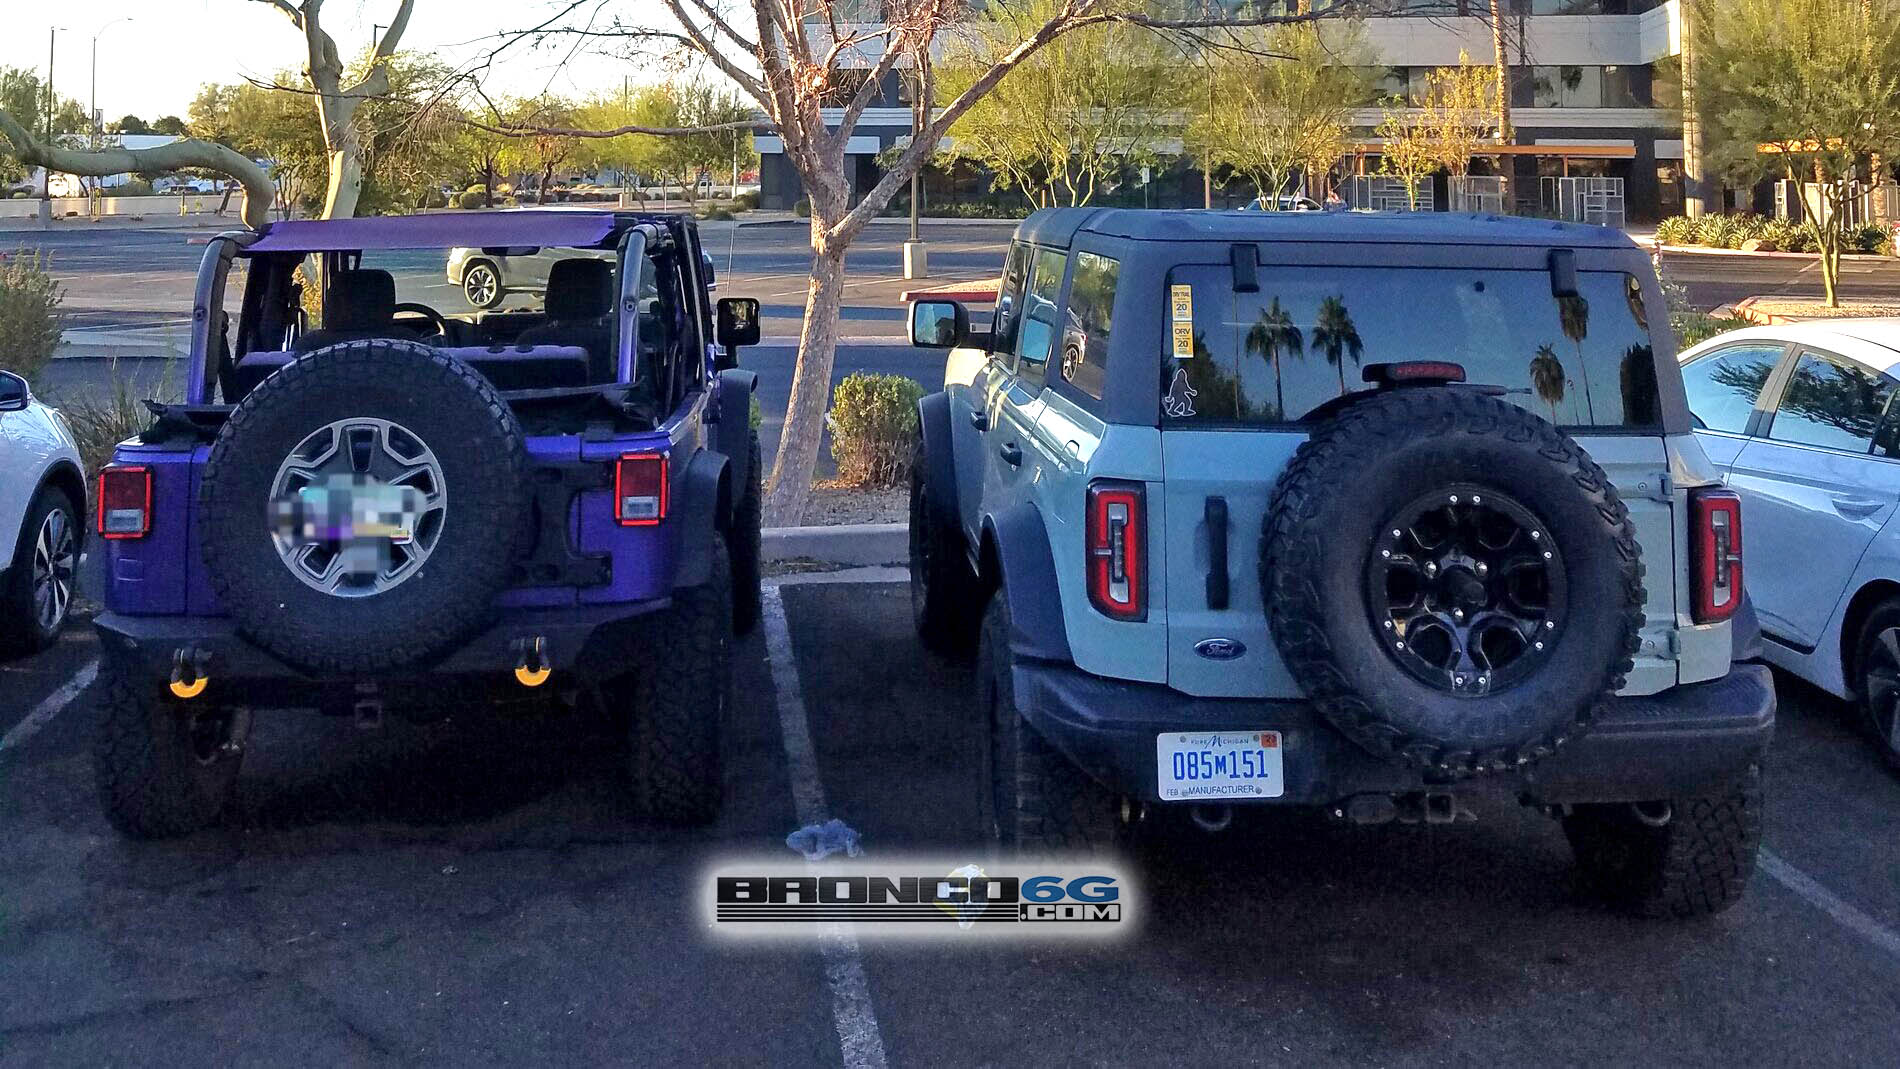 Sasquatch 2021 Ford Bronco Looks Taller When Compared to Lifted Jeep  Wrangler - autoevolution